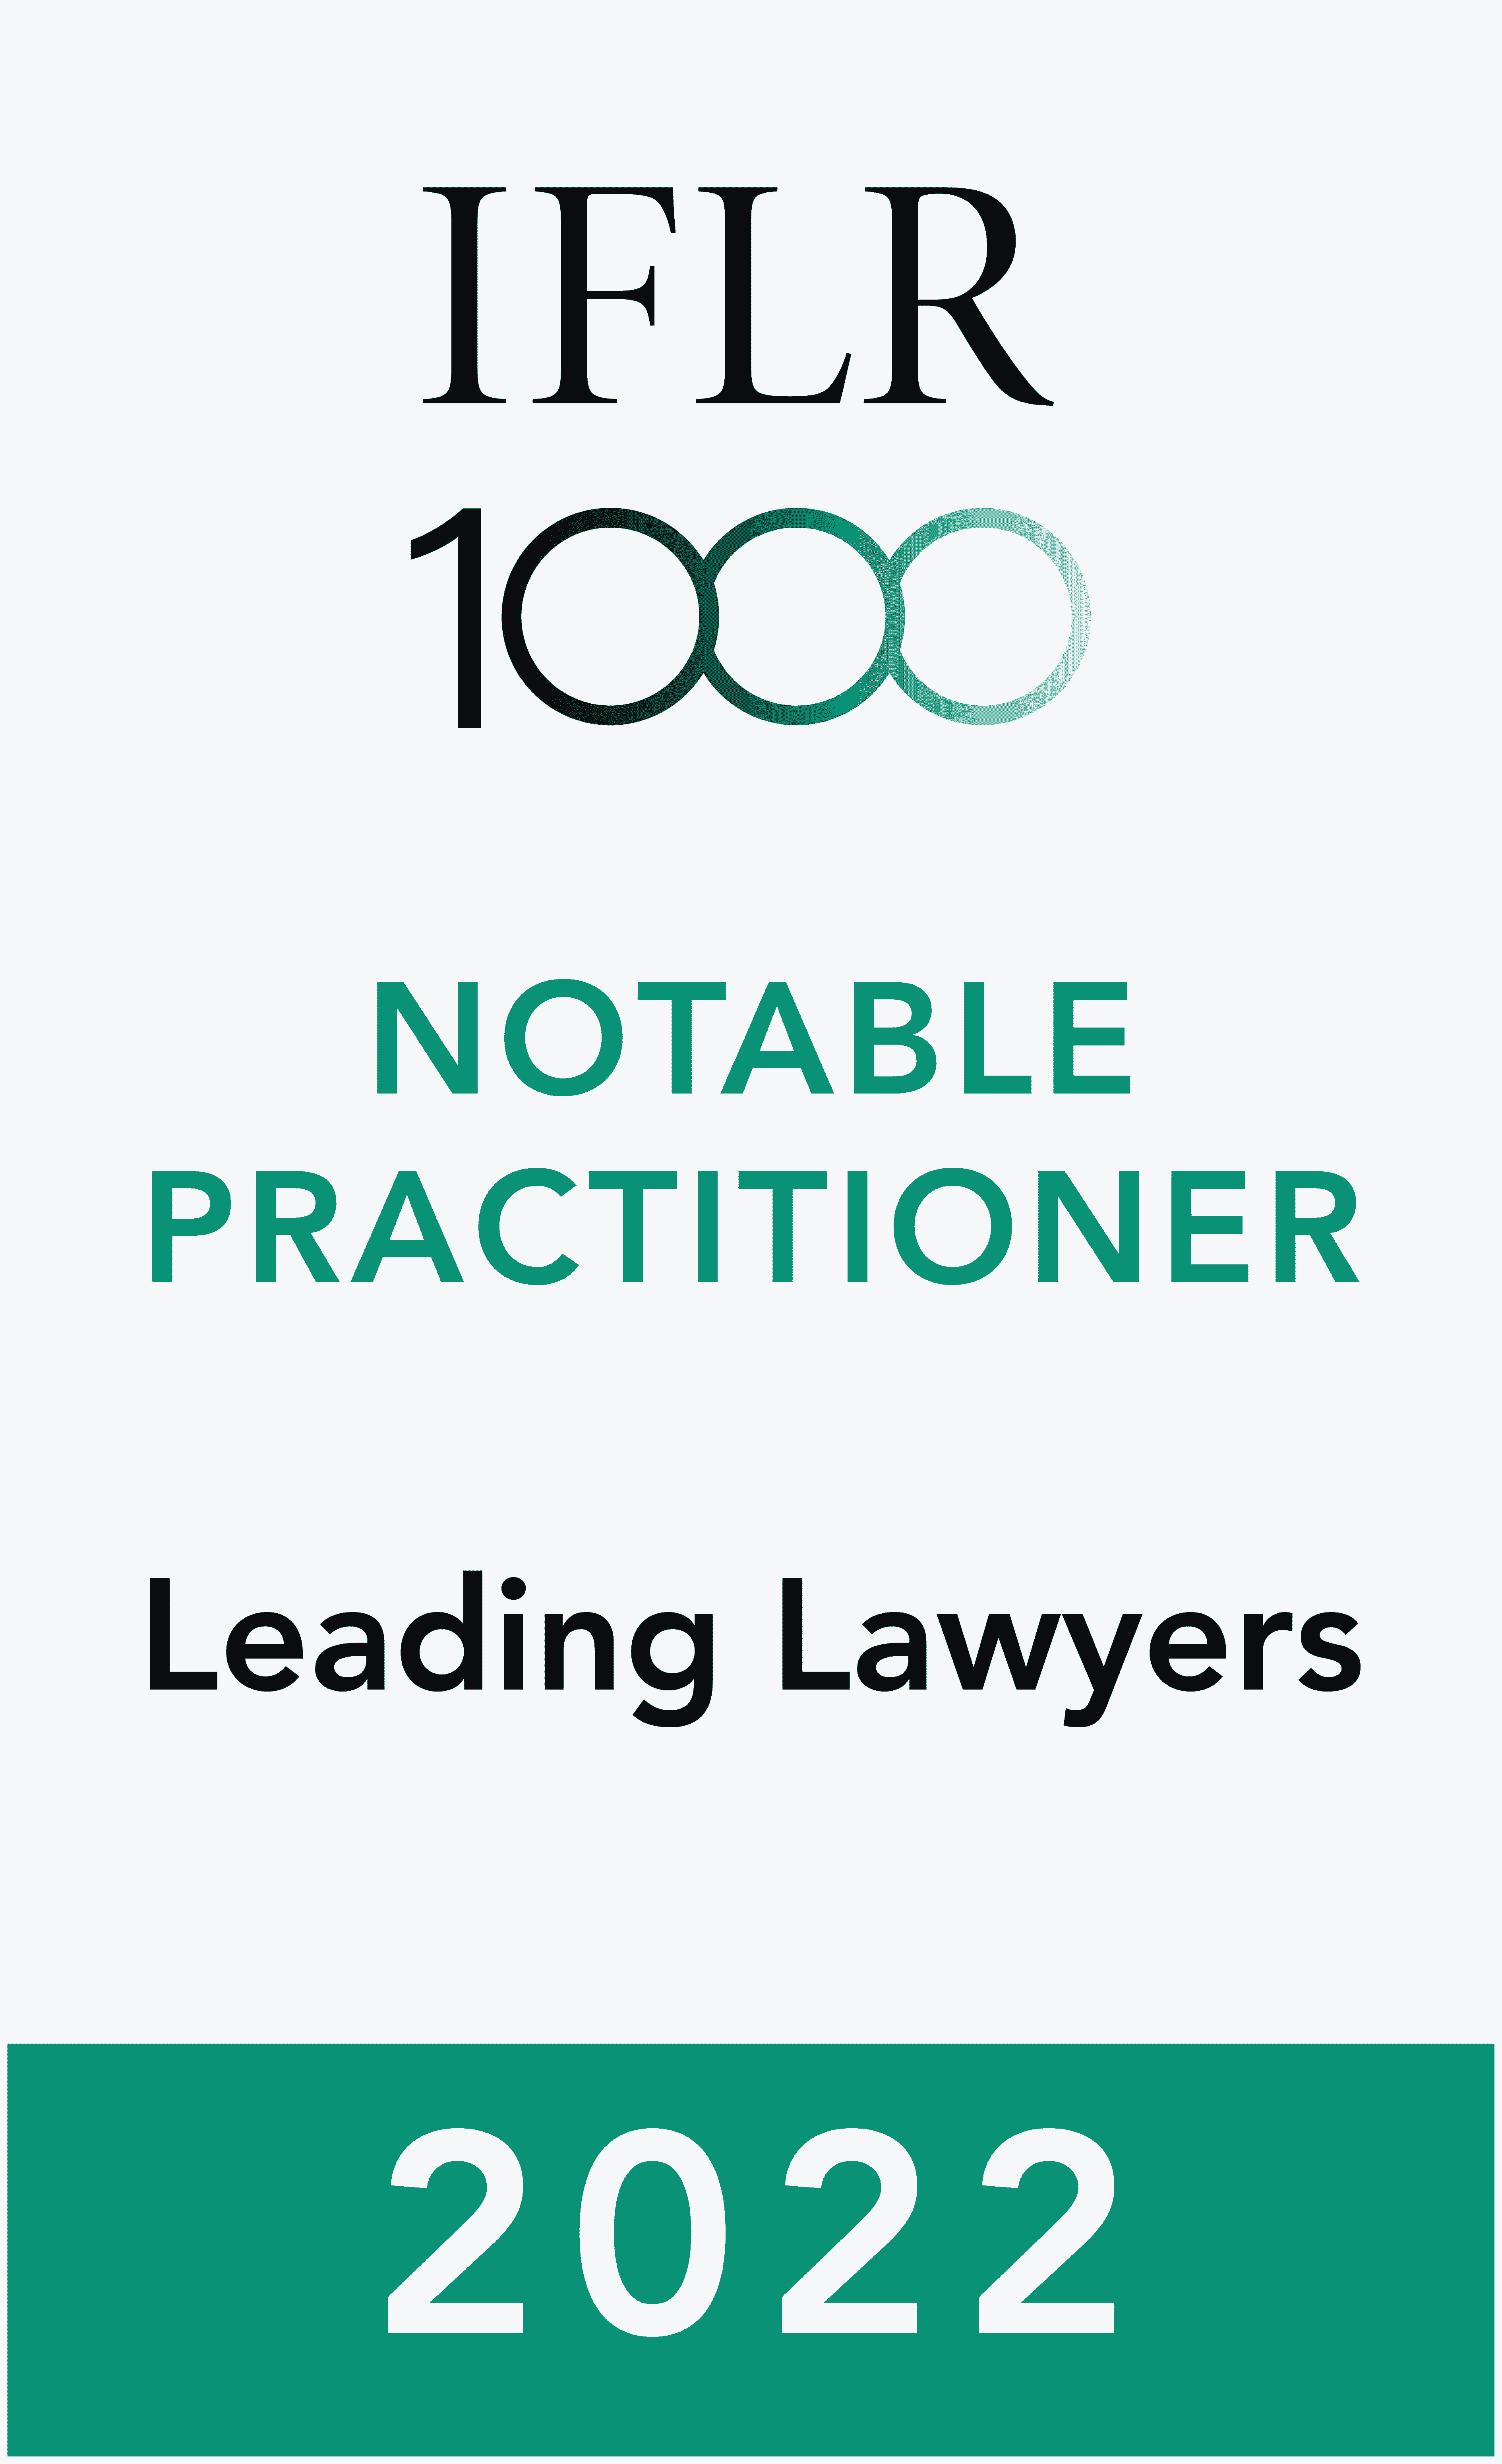 Yuen Law Managing Director Samuel Yuen Is Ranked In IFLR1000 as a Notable Practitioner, Leading Lawyers 2022, award